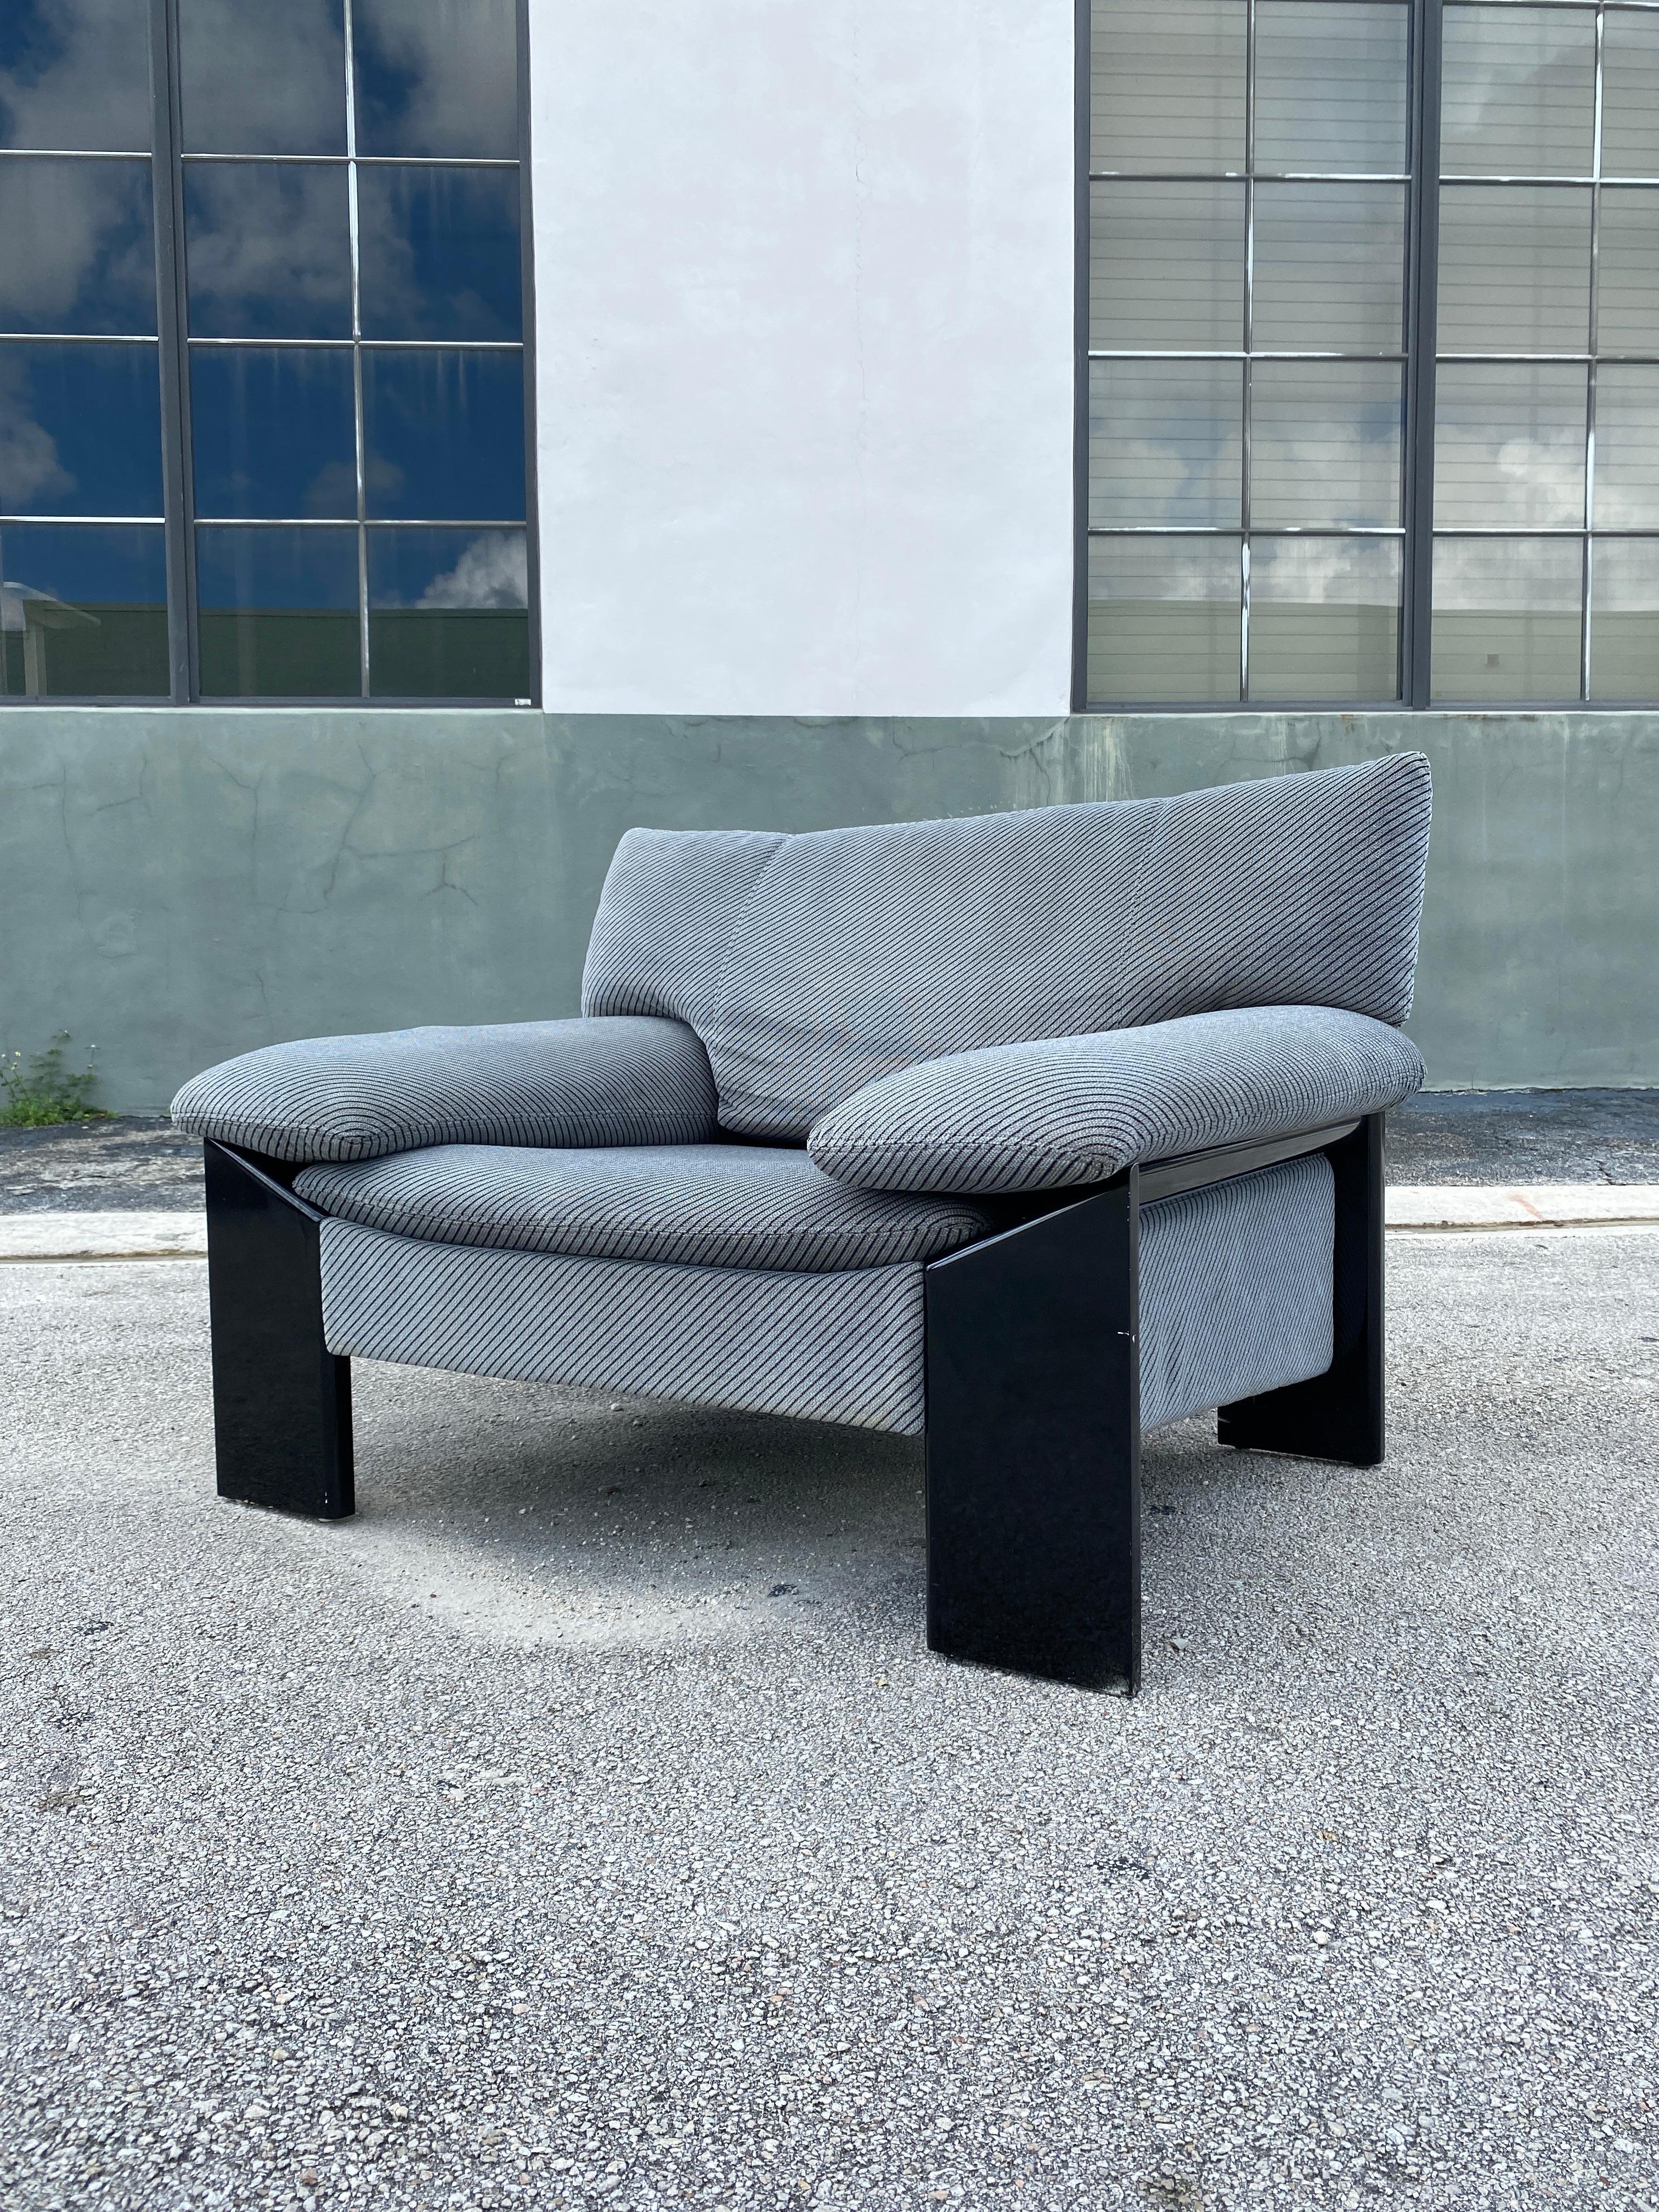 Vintage unique black lacquered high gloss wooden frame armchair in the style of Sapporo. This lounge chair features original grey velvet upholstery with dark blue pinstripes.Circa 1970s.

62”W x 26”D x 28”H x 14”Seat H x 17”Arm H
Part of